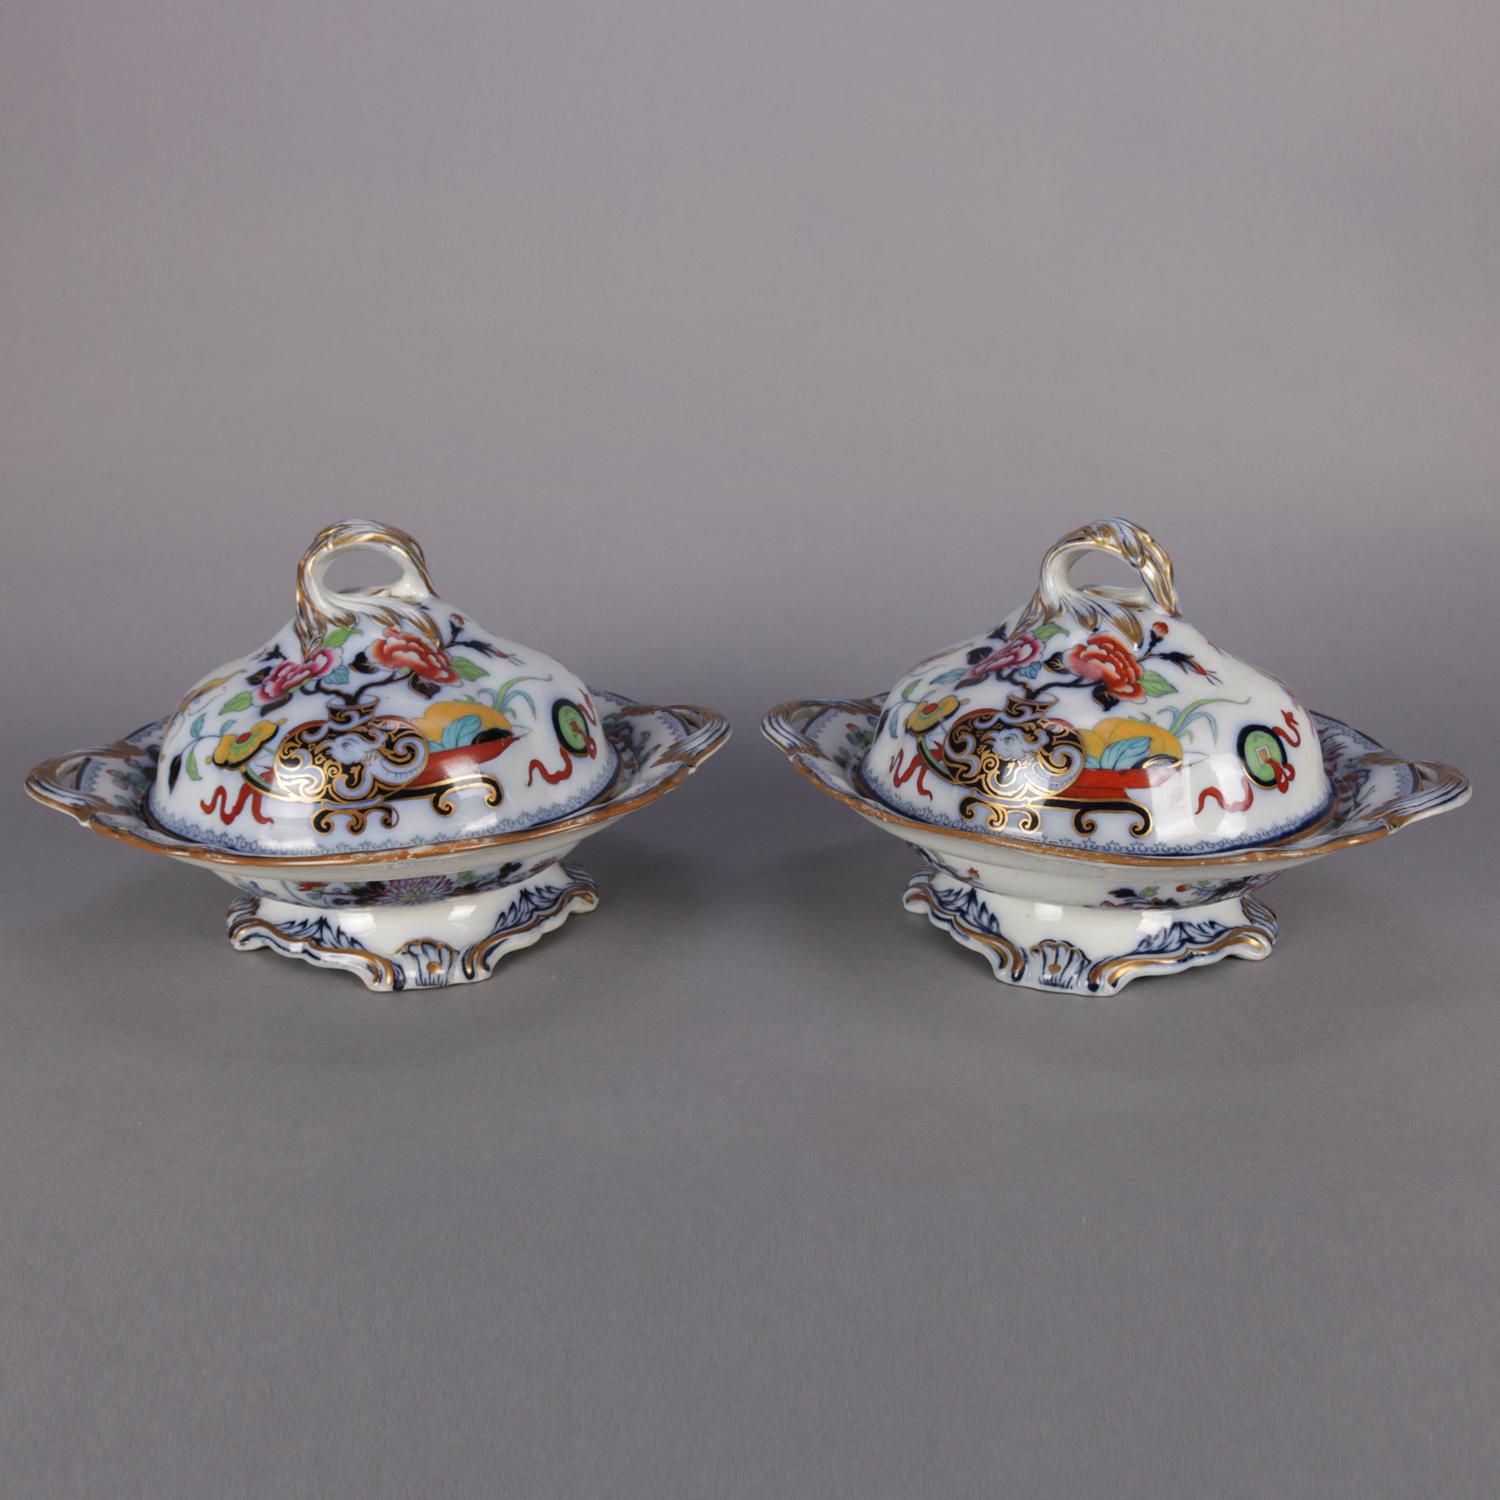 Pair of antique English Wedgwood Noma pattern ironstone tureens feature polychromed, flow blue and gilt Asian floral and urn decoration, one en verso marked NOMA 4314 with the other marked 4317, mid-1800s.

***DELIVERY NOTICE – Due to COVID-19 we